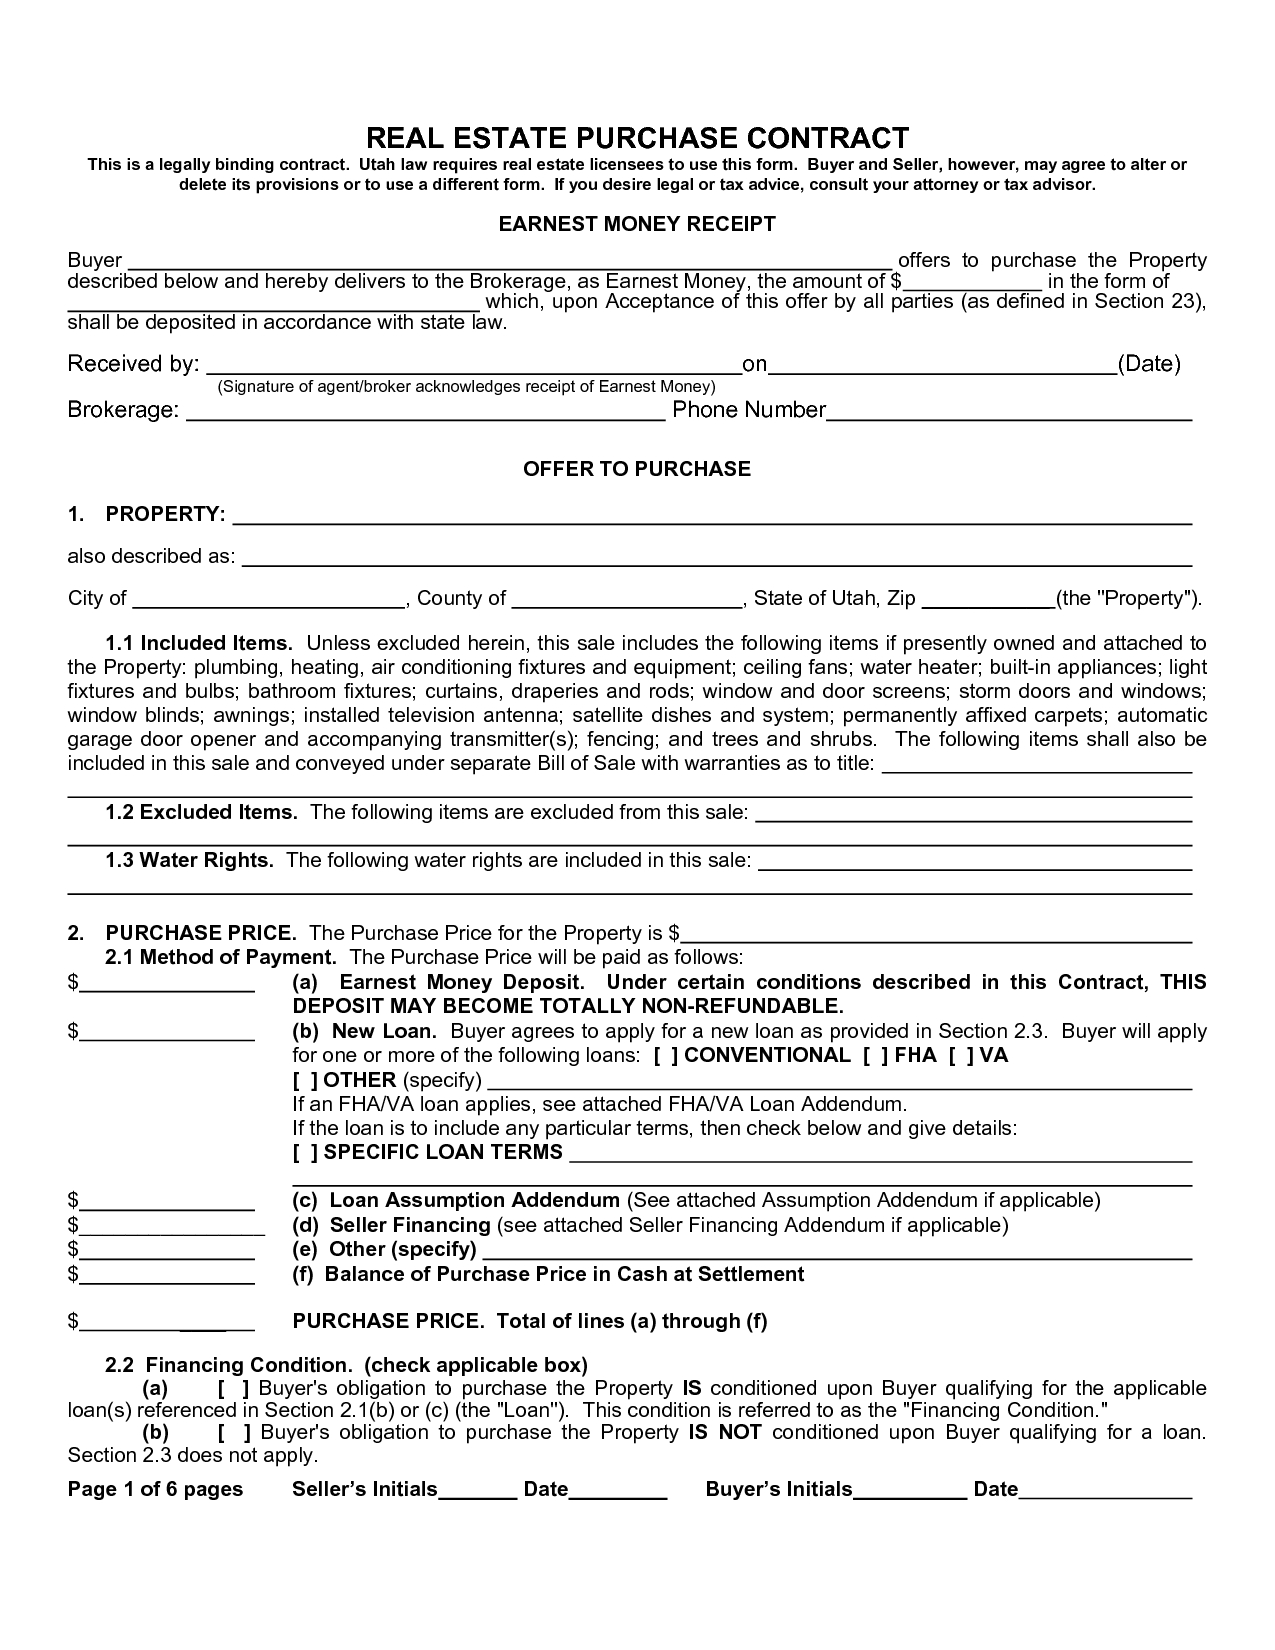 Real Estate Purchase Agreement Form Sample Image Gallery - Imggrid - Free Printable Real Estate Purchase Agreement